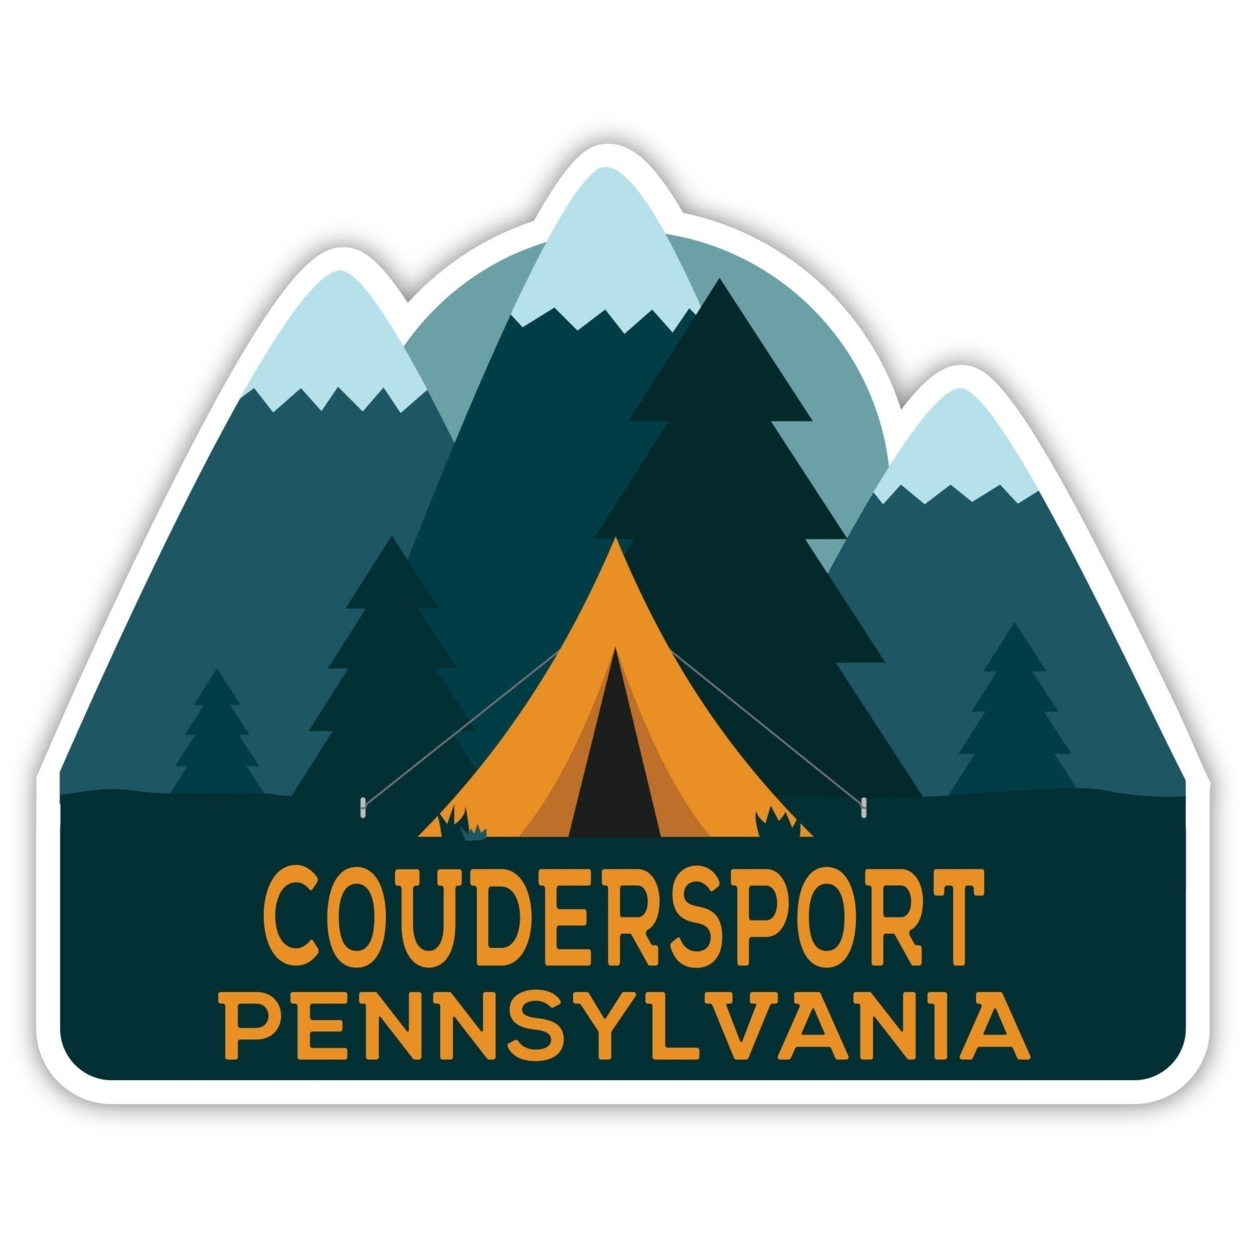 Coudersport Pennsylvania Souvenir Decorative Stickers (Choose Theme And Size) - Single Unit, 8-Inch, Great Outdoors